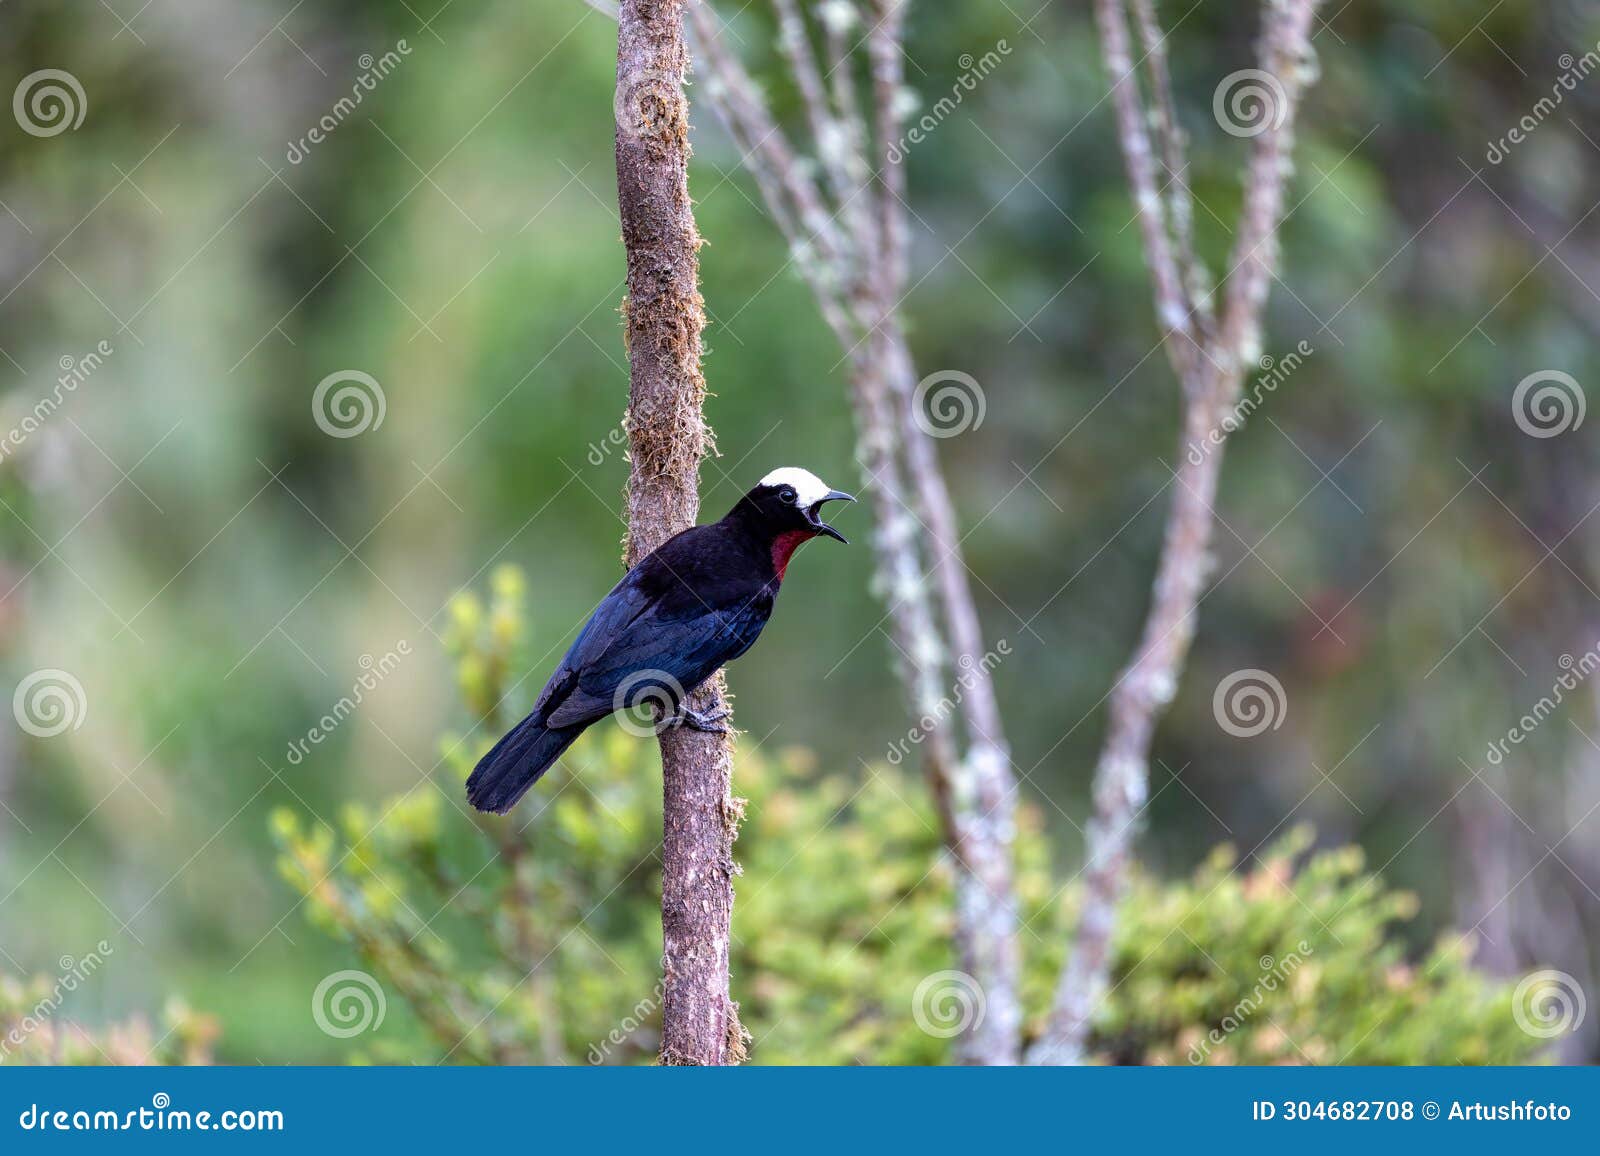 white-capped tanager (sericossypha albocristata), santuario del oso de anteojos. wildlife and birdwatching in colombia